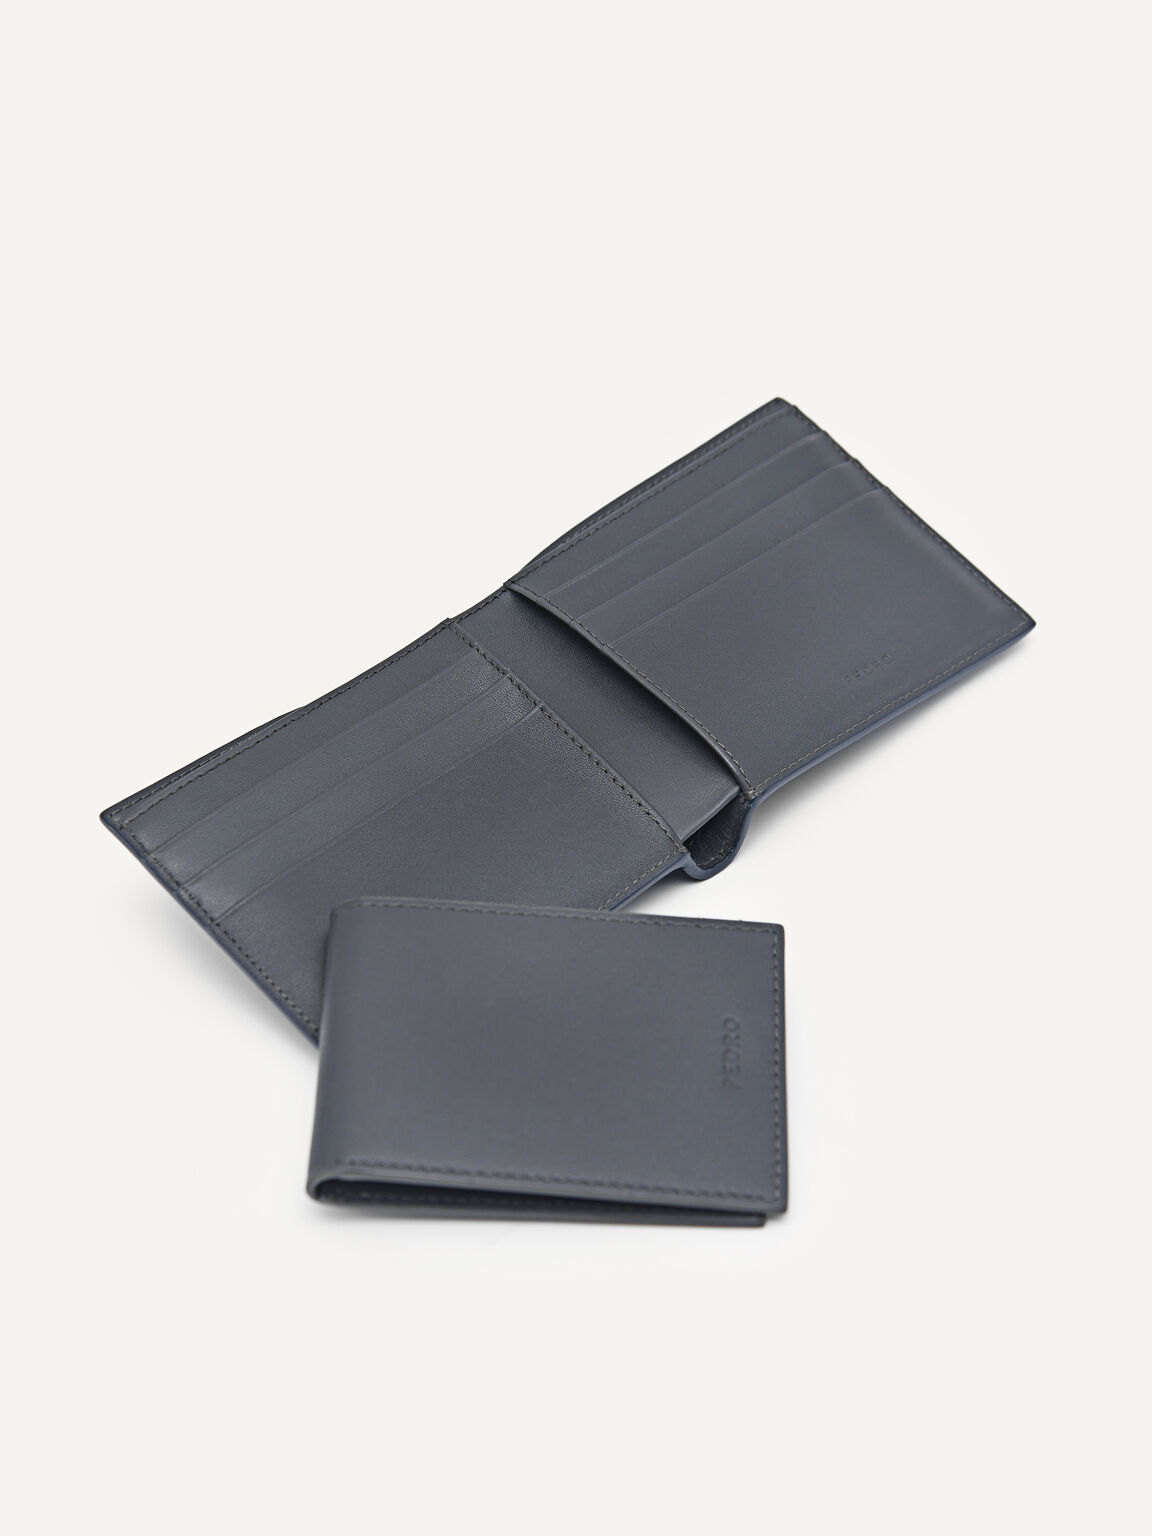 Leather Bi-Fold Wallet With Insert, Navy